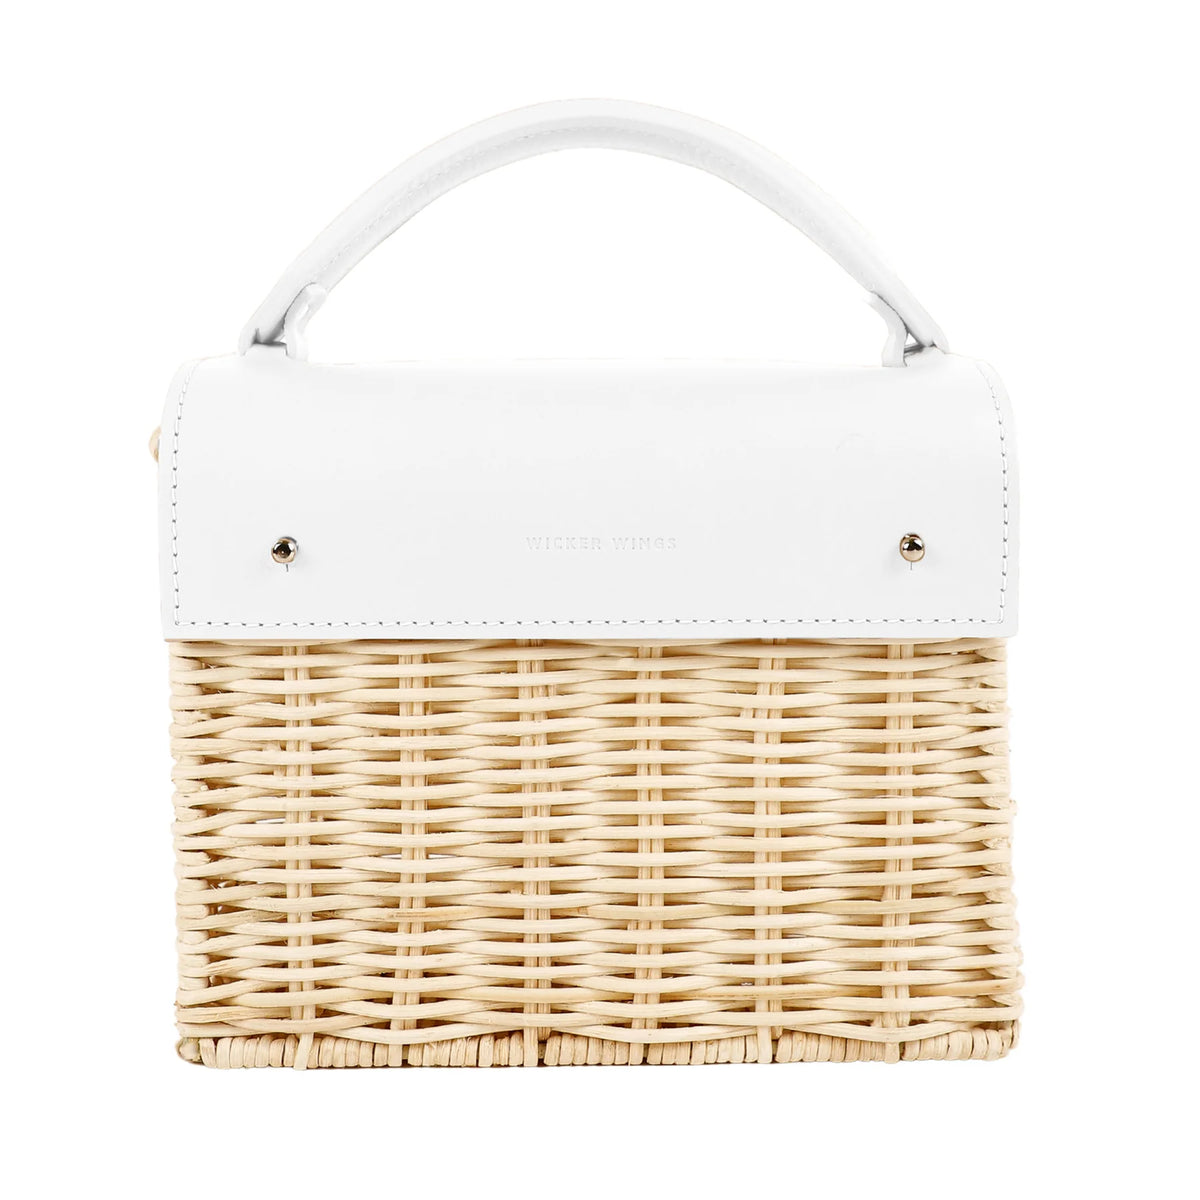 Wicker bag in natural with white leather details and adjustable shoulder strap